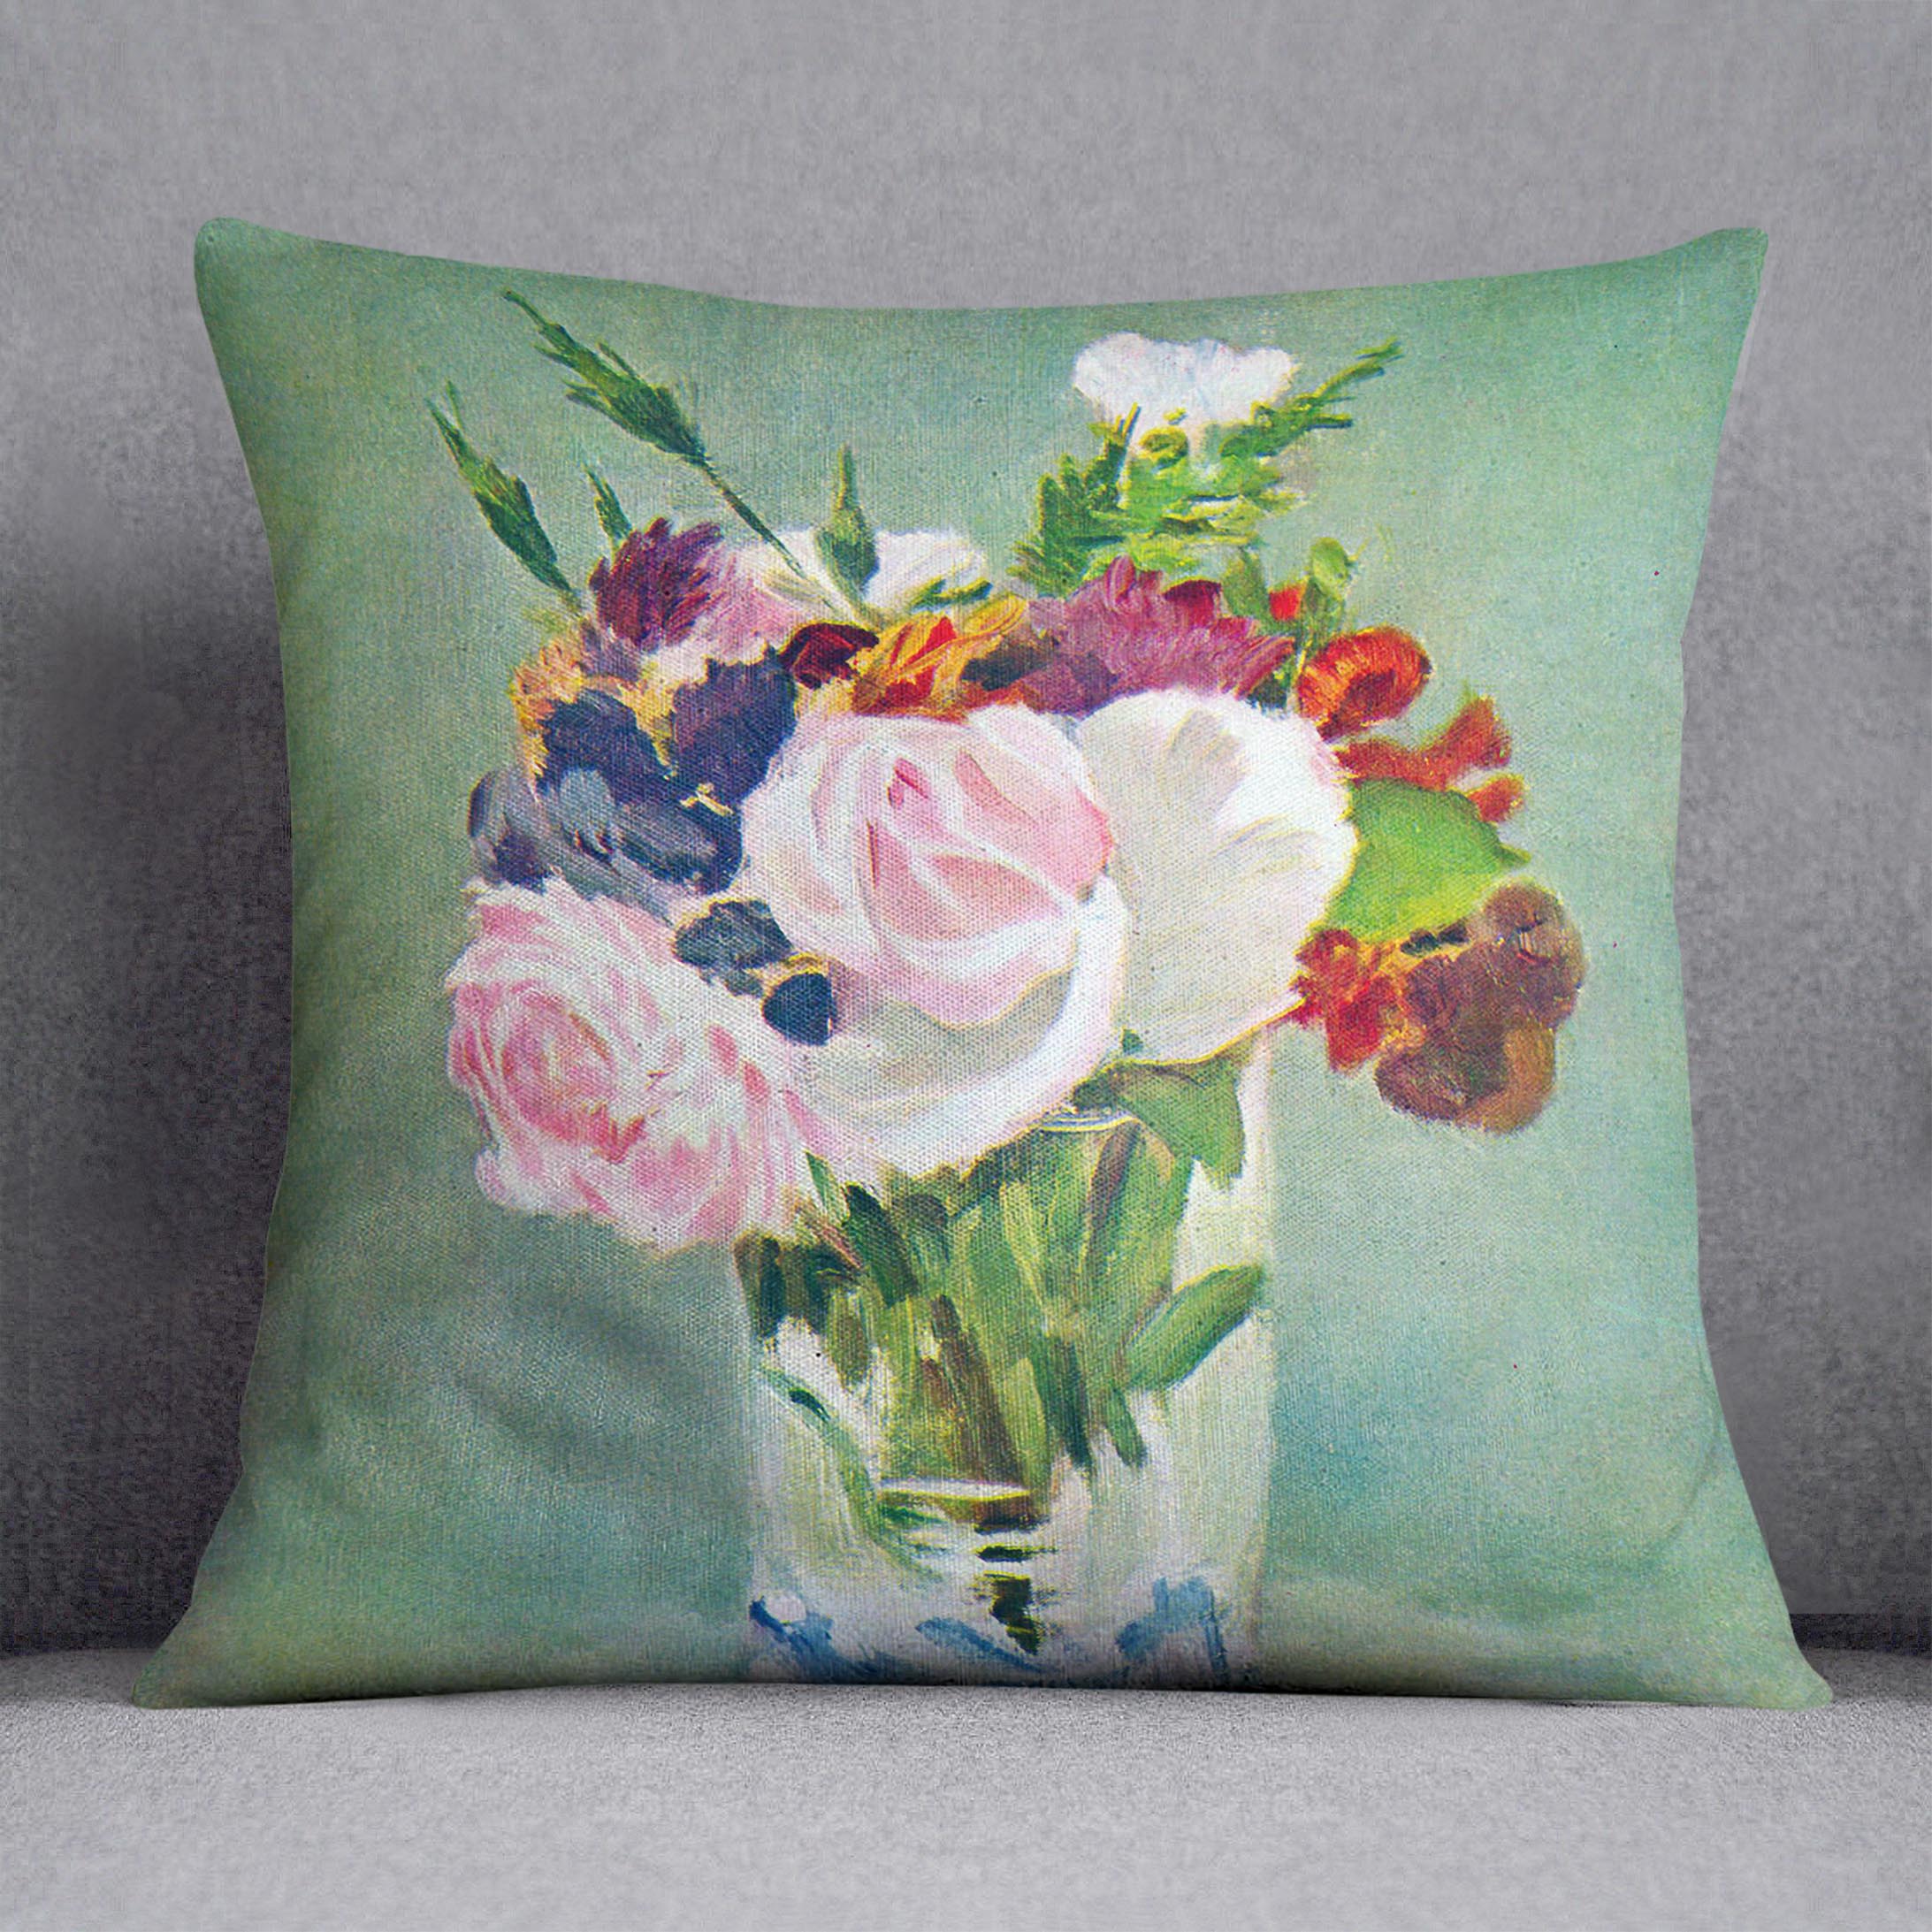 Still Life with Flowers 2 by Manet Cushion